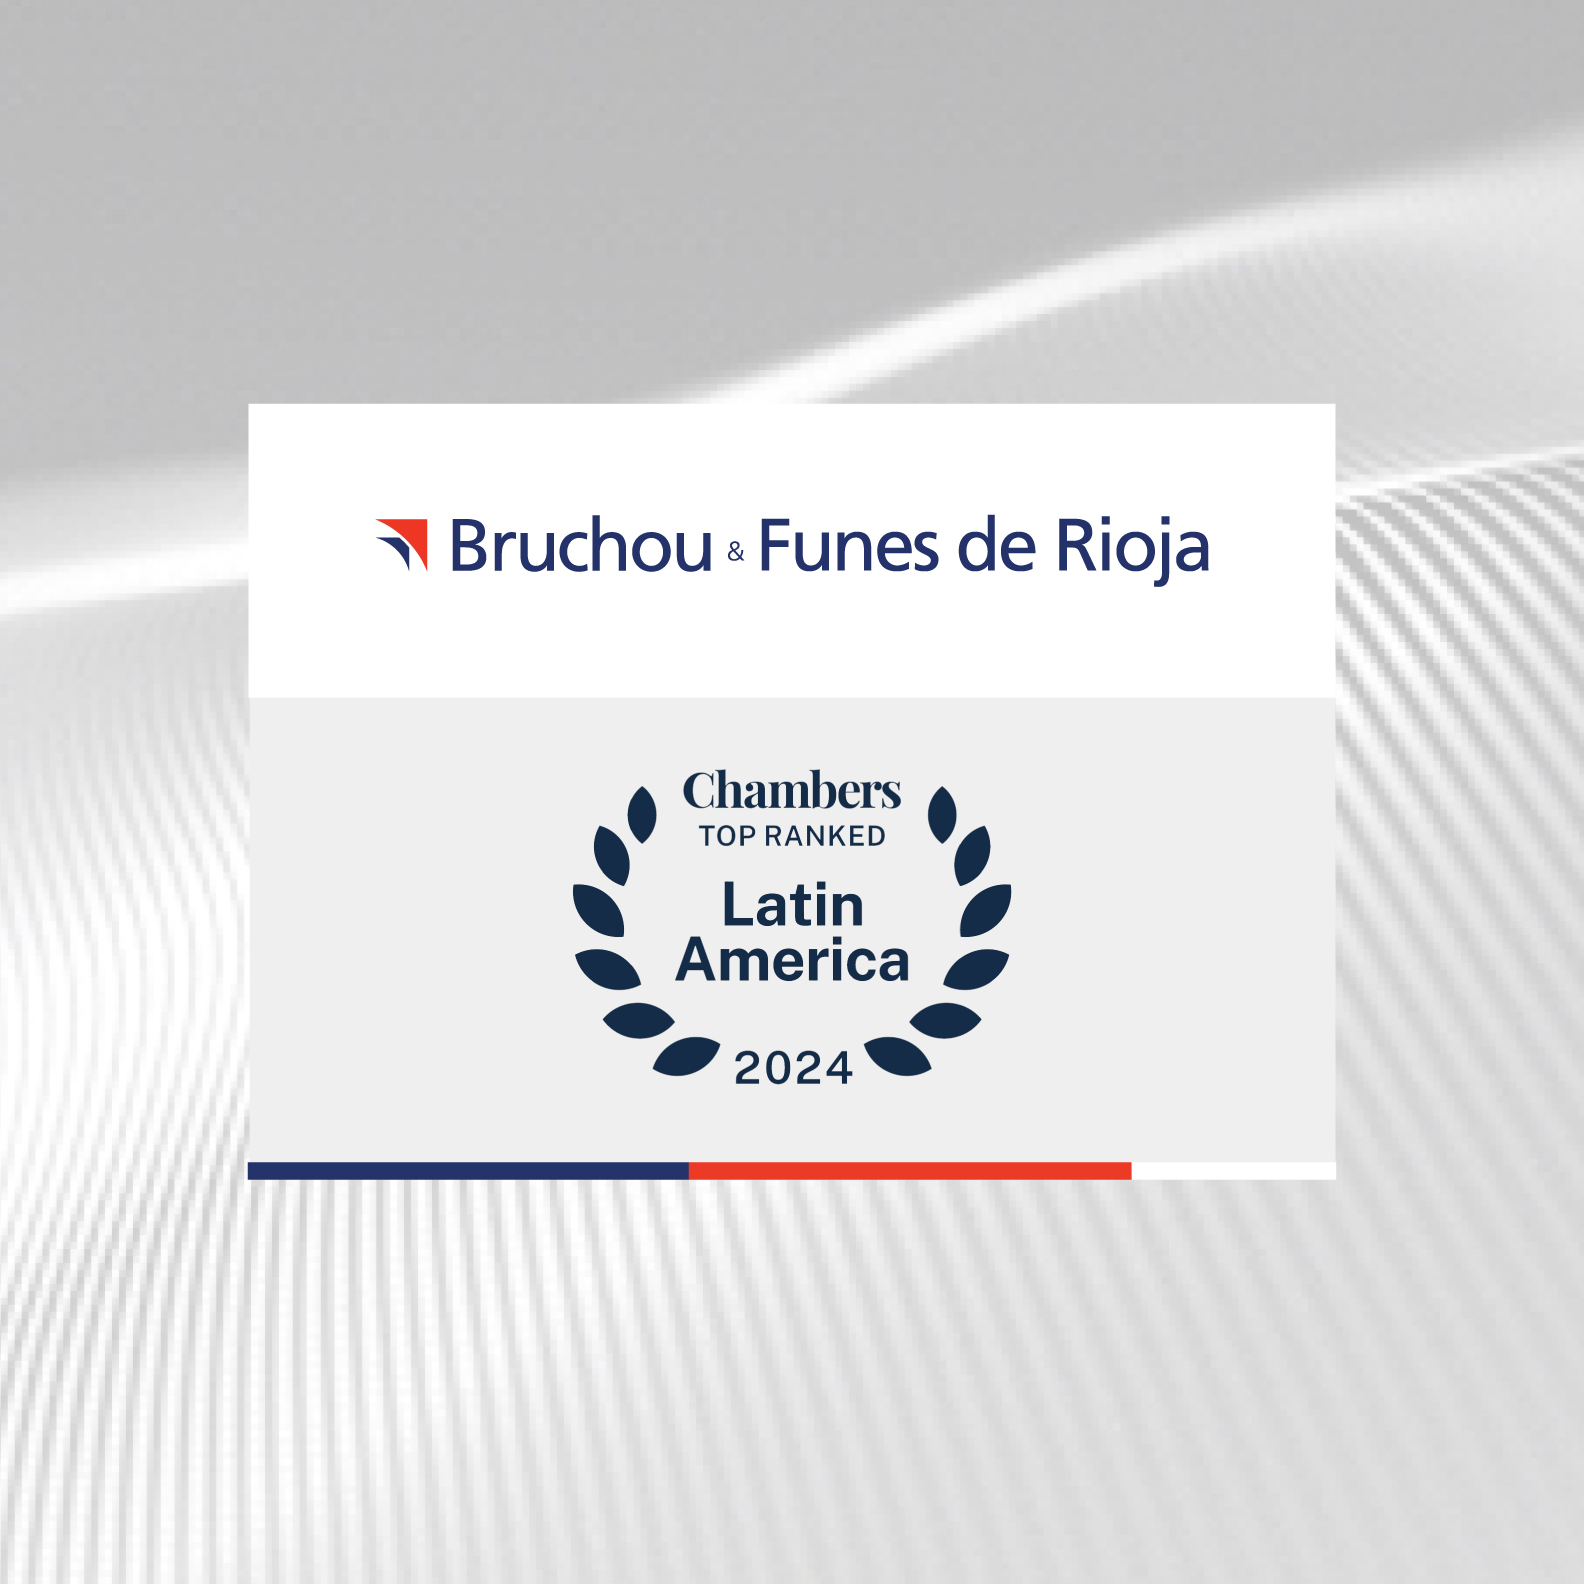 Bruchou & Funes de Rioja recognized as a Top Ranked and leading firm by the Chambers Latin America Guide 2024.